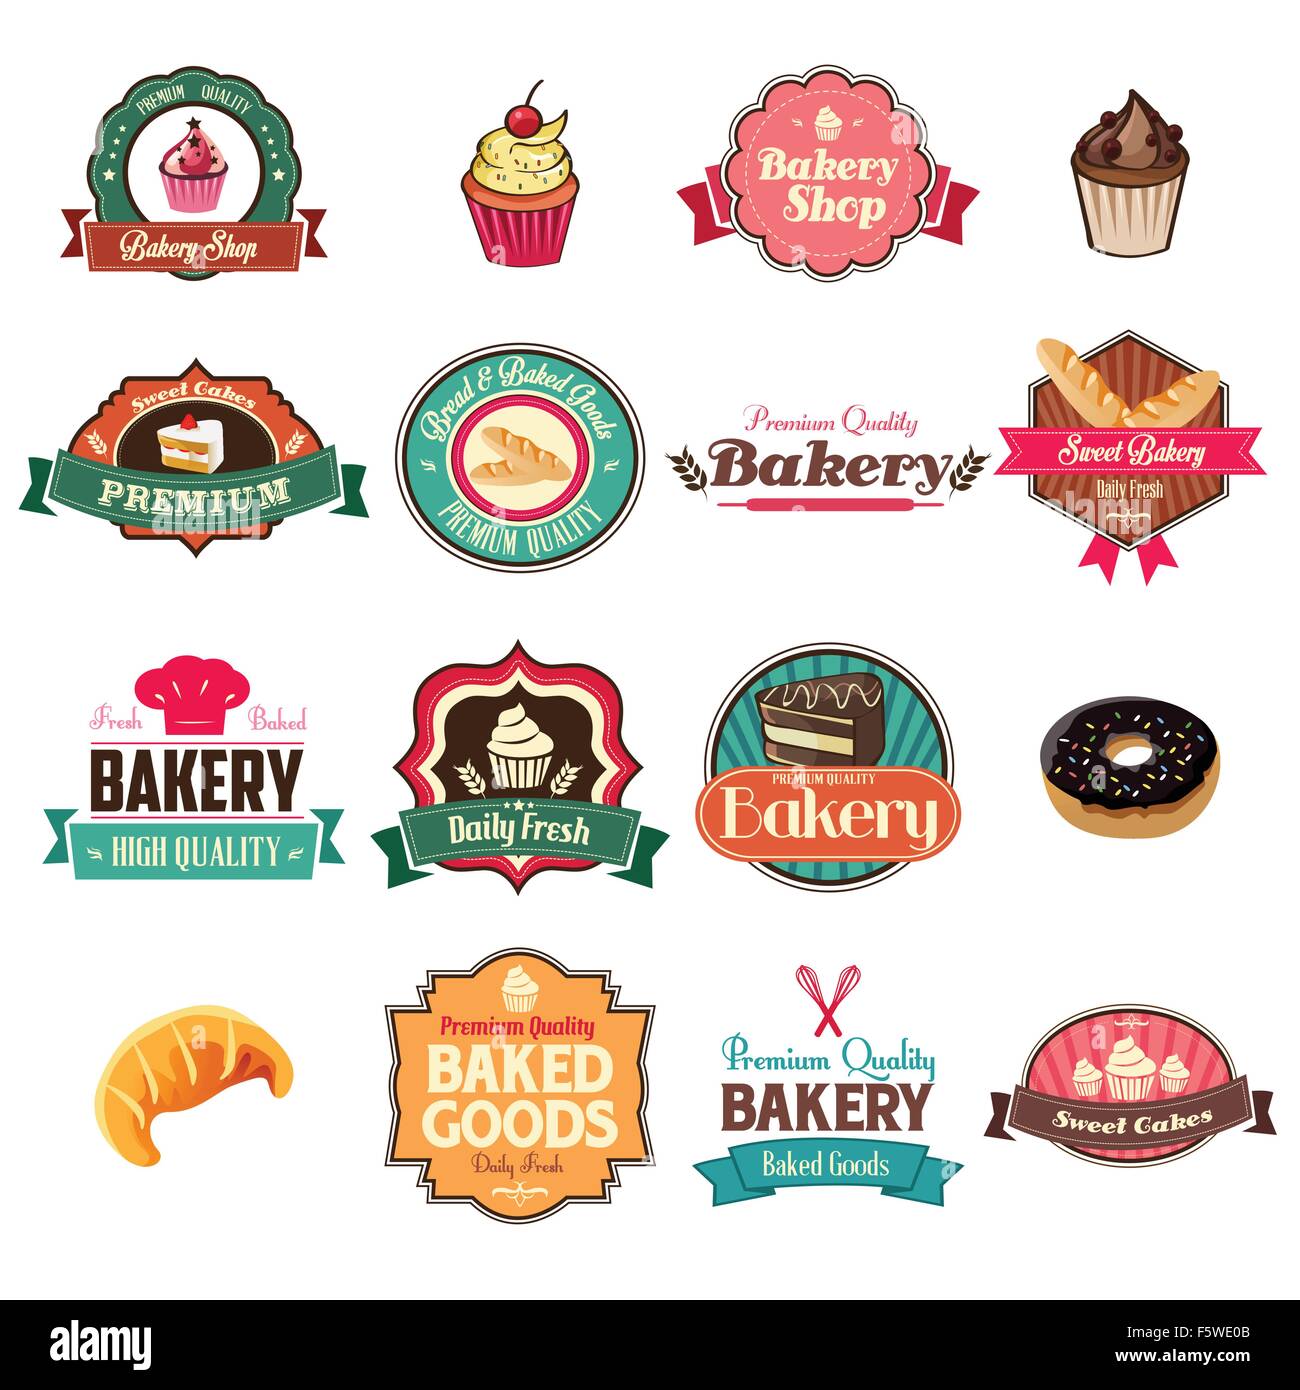 A vector illustration of vintage bakery collection of icons and tag sets Stock Vector